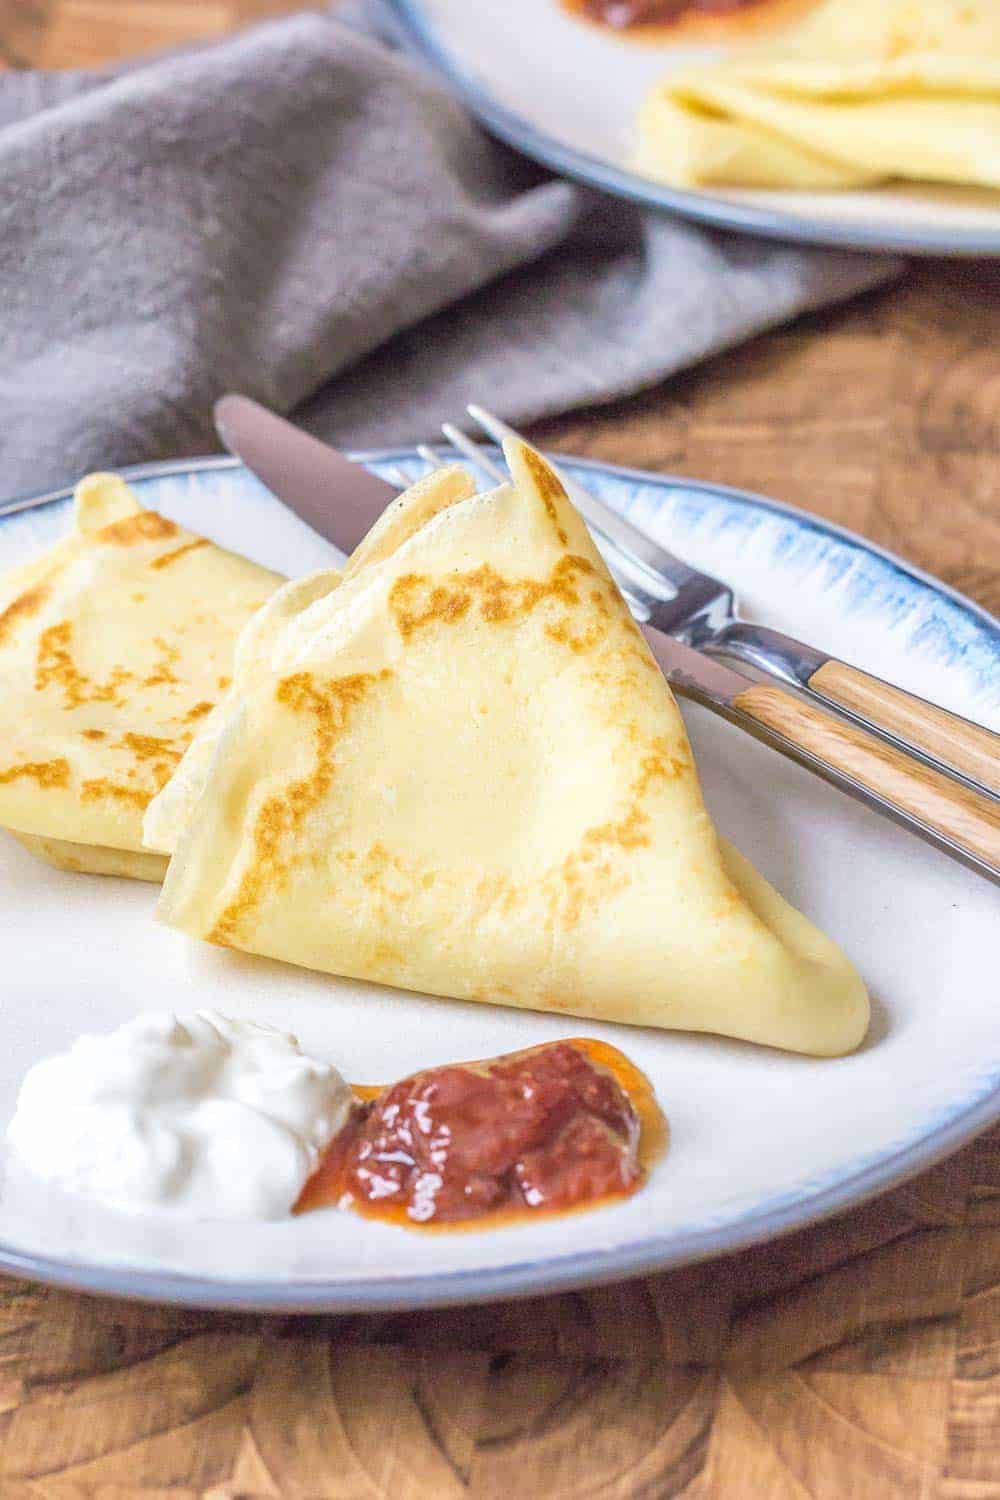 Russian crepes are light and airy, and wonderful for breakfast. Serve them with sour cream and jam for a delicious treat.